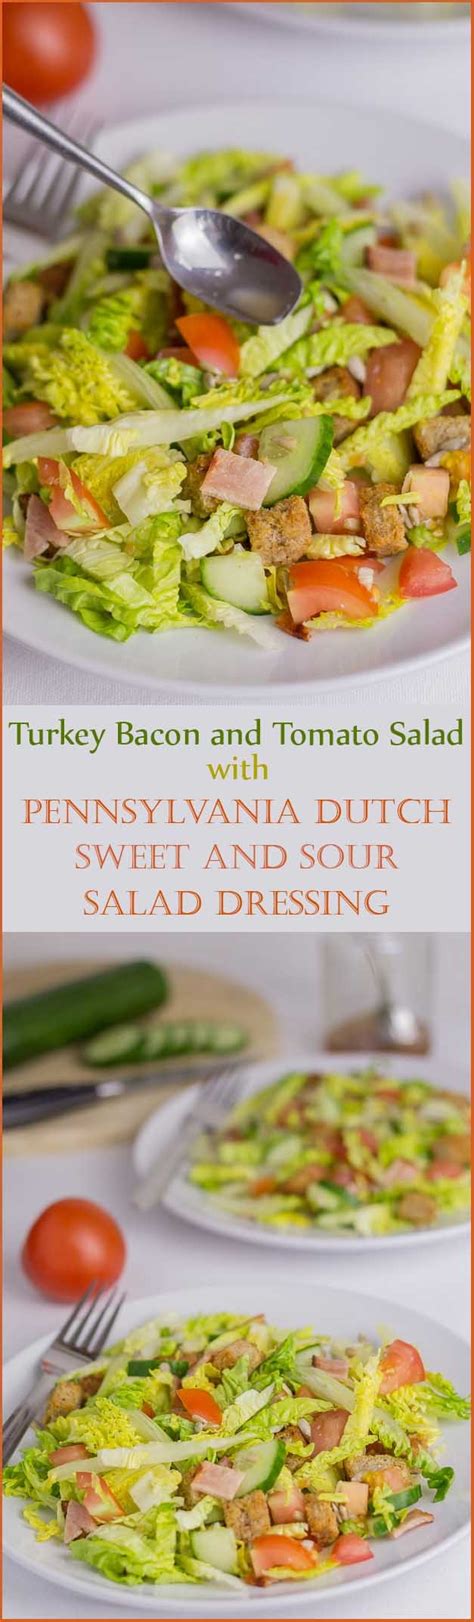 Turkey Bacon And Tomato Salad With Pennsylvania Dutch Sweet And Sour